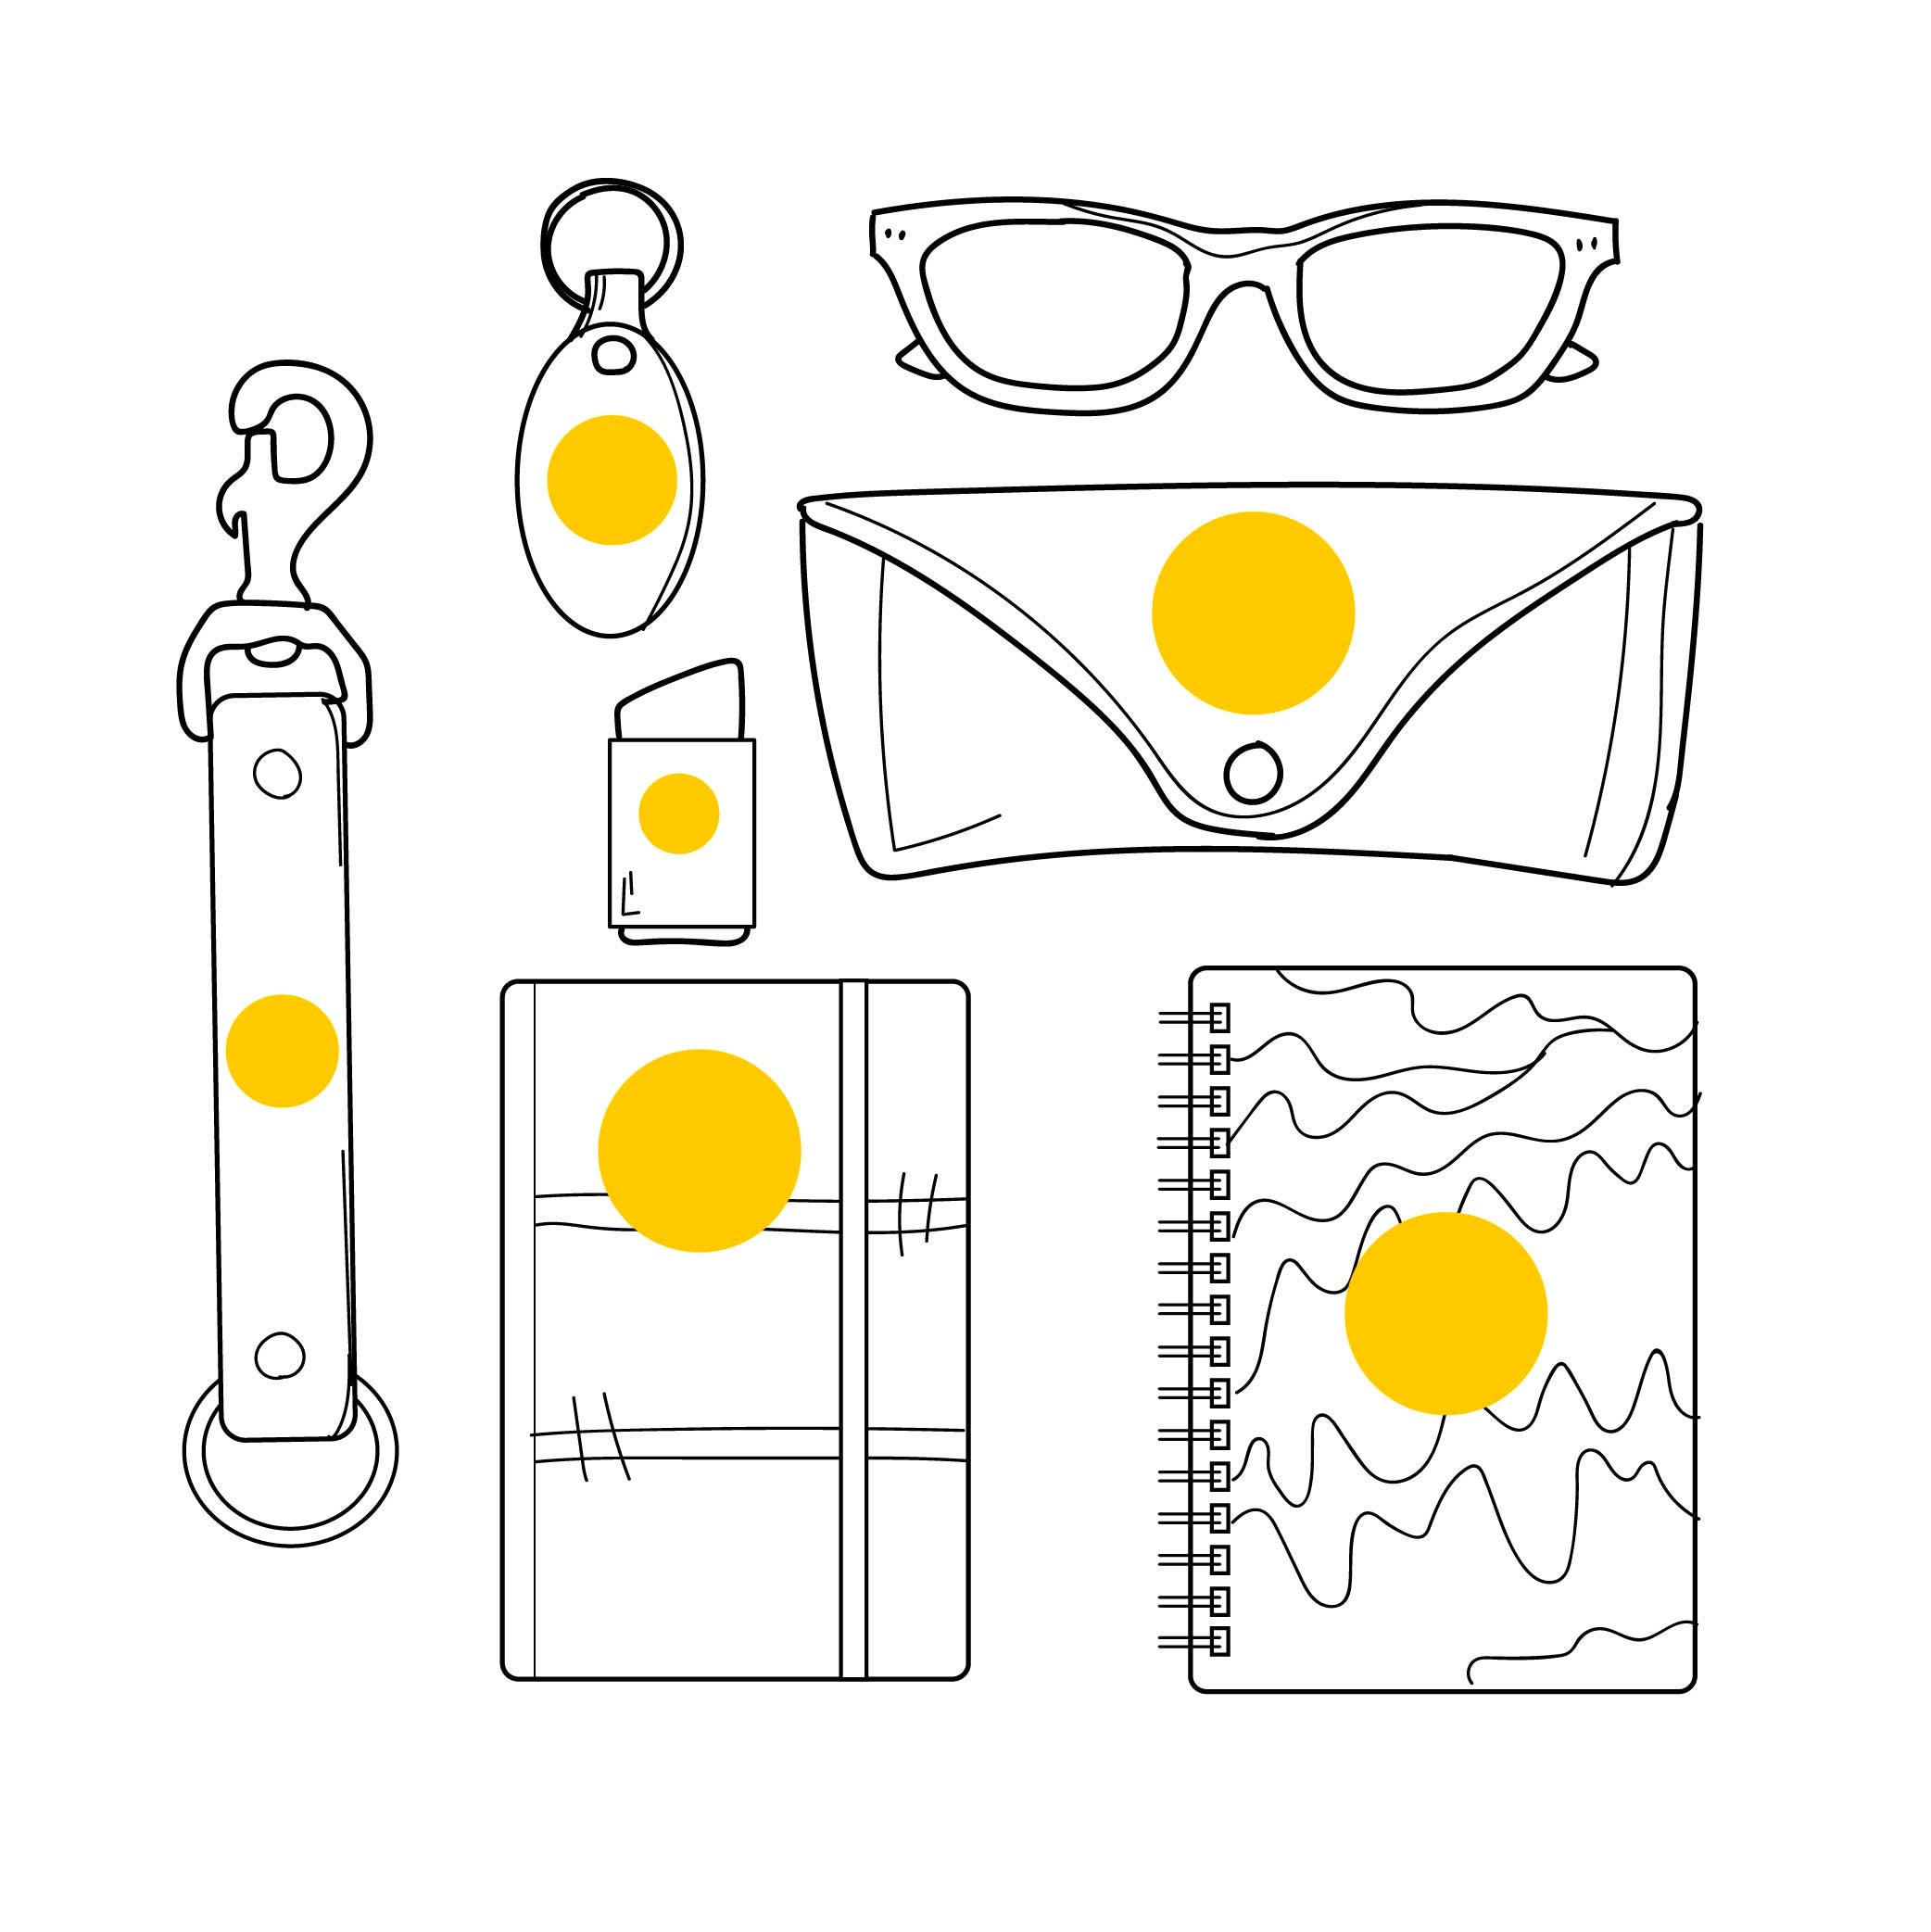 Illustrations of various promotional goods, such as a key chain, notebook, journal, and sun